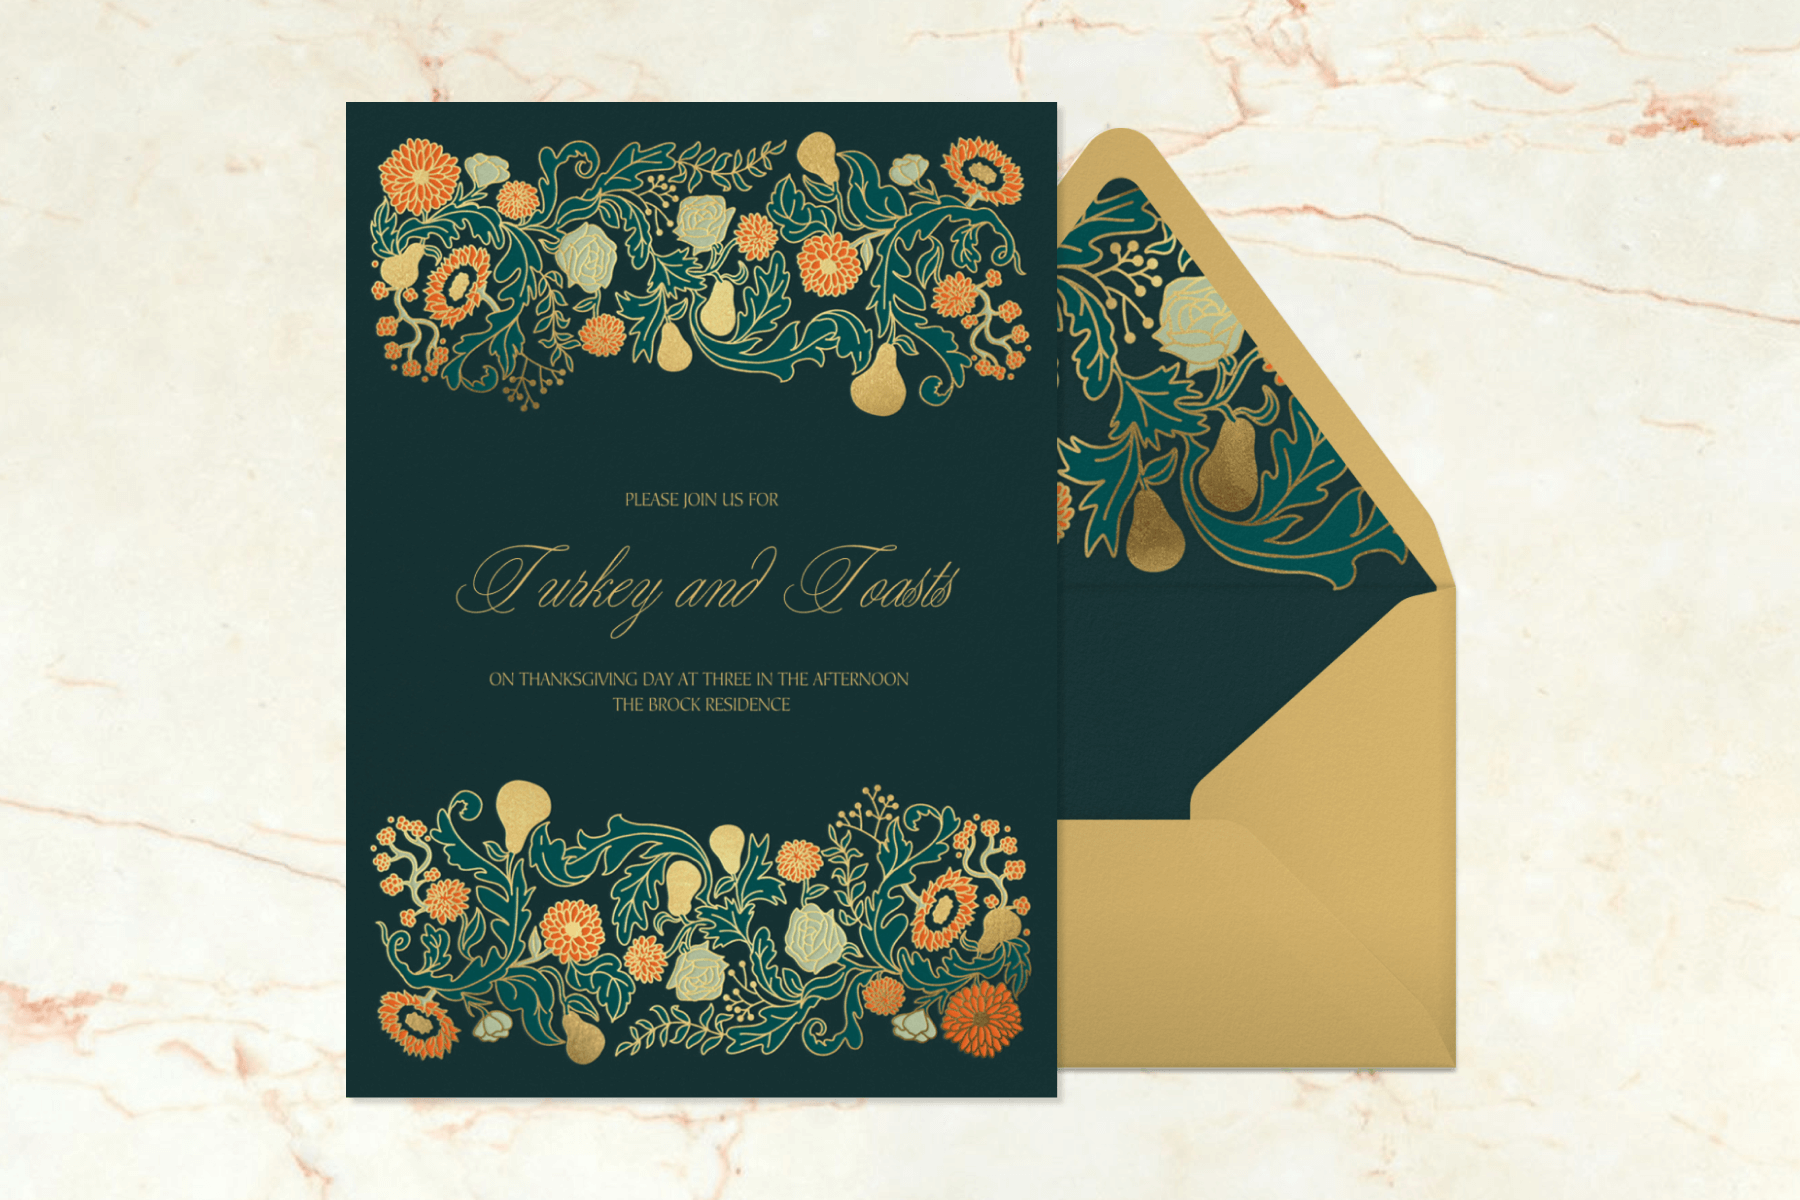 Dark teal Thanksgiving invitation with an orange, yellow, and blue floral pattern that reads, "Please join us for Turkey and Toasts on Thanksgiving day at three in the afternoon."